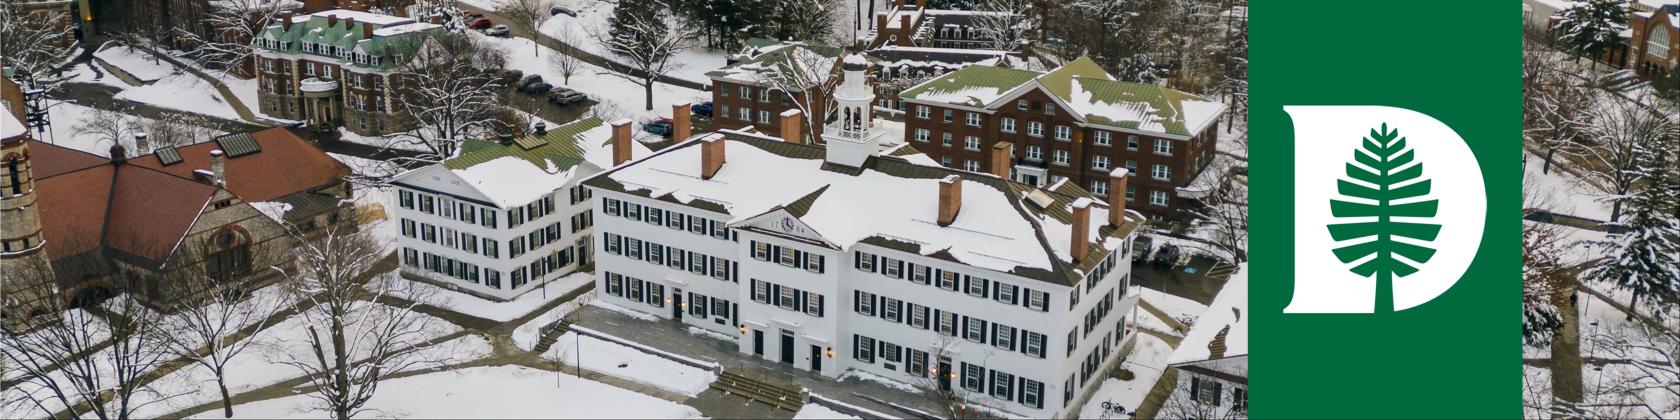 LinkedIn Banner showing Dartmouth Hall in winter. 